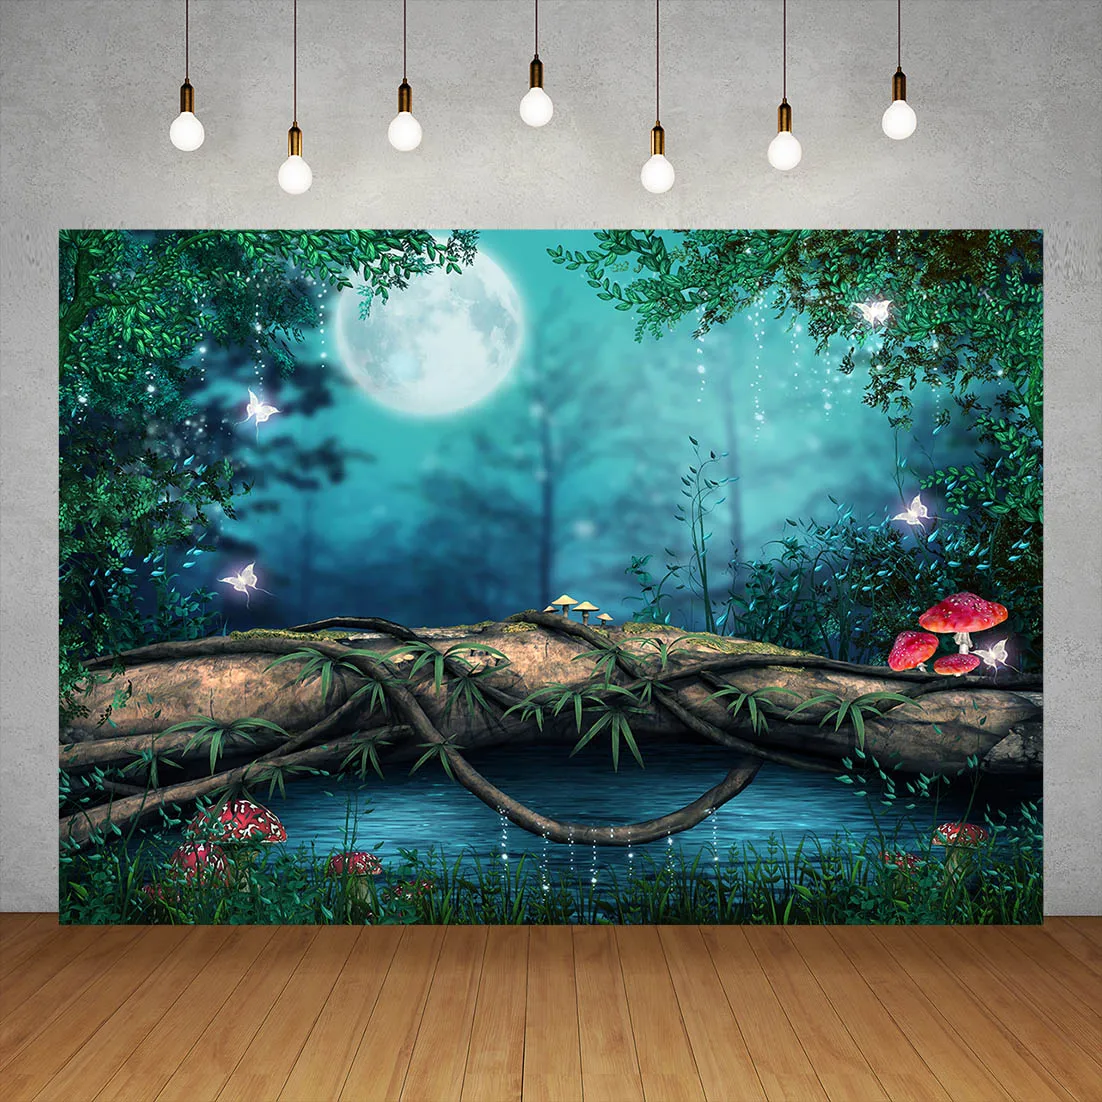 

Fairy Tale Forest Lake Party Photographic Backgrounds Vinyl Backdrops for Photo Studio Children Baby Portrait Family Photocall